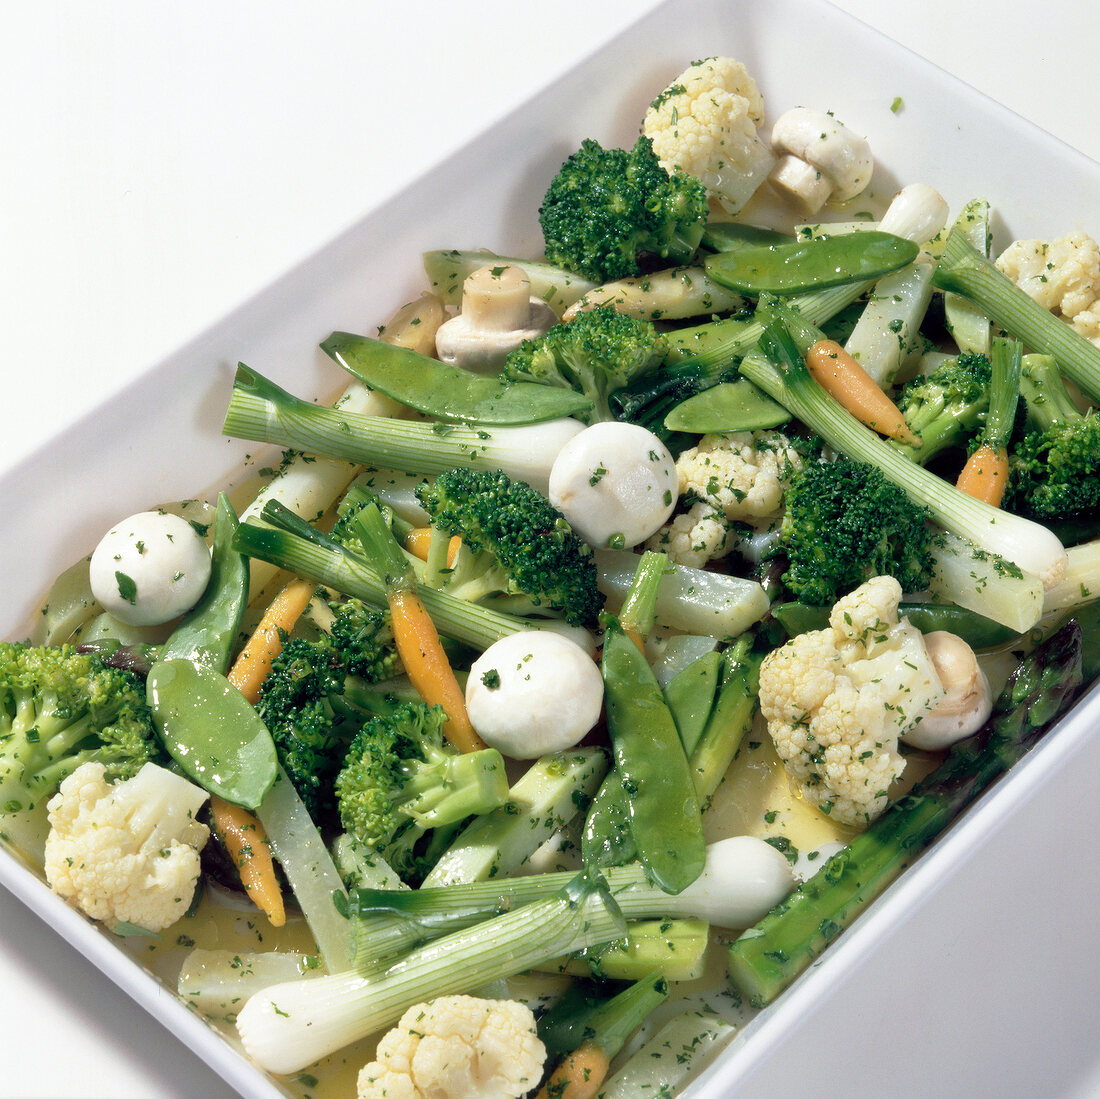 Chopped broccoli, carrots and other vegetables in serving dish